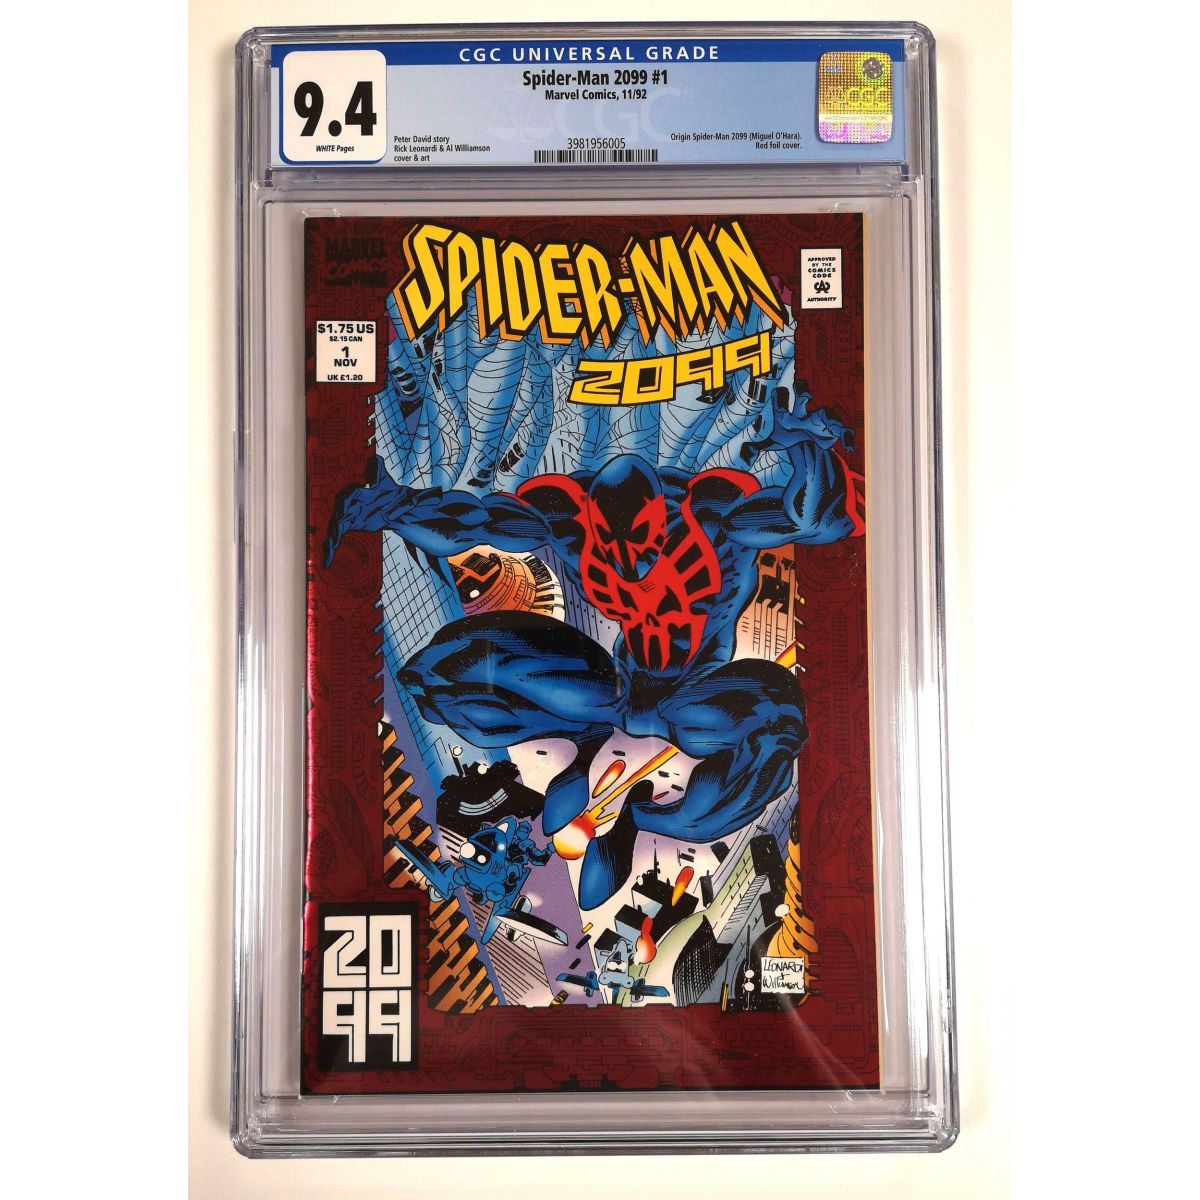 Item Comics - Marvel - Spider-Man 2099 N°1 (1992 1st Series) - [CGC 9.4 - White Pages]